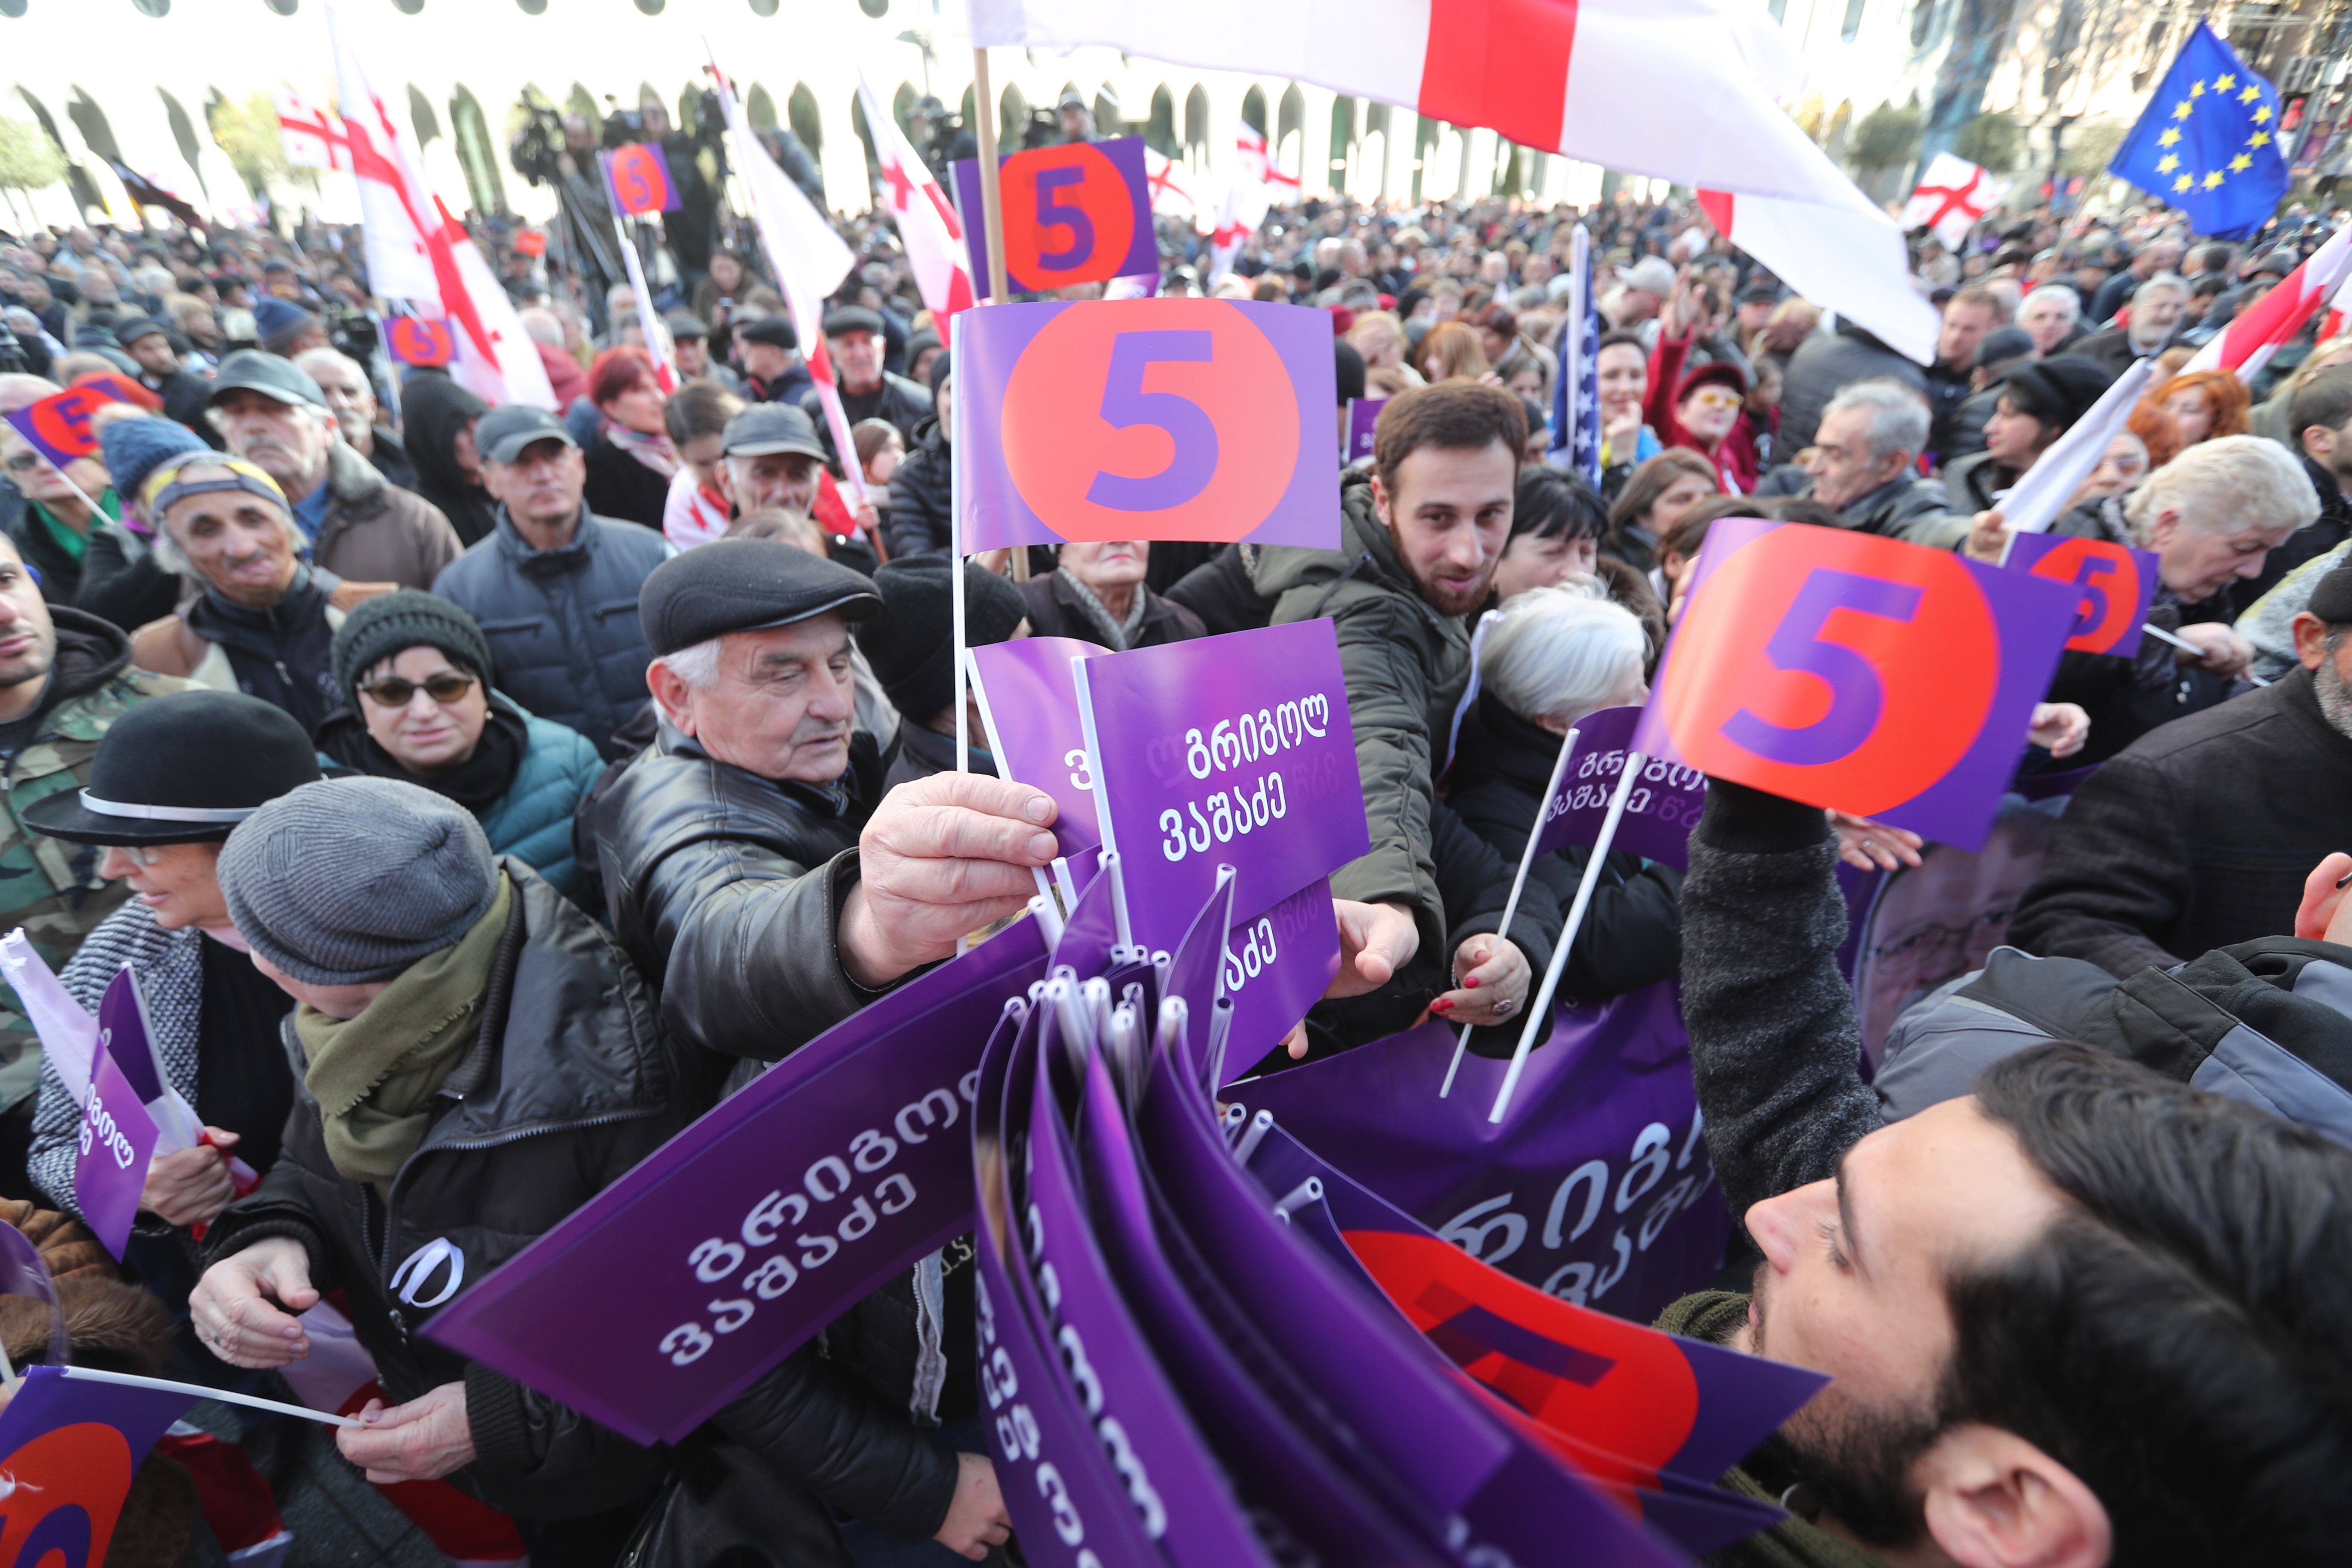 Supporters of Georgia’s opposition party at a protest rally in Tbilisi on December 2, 2018. Photo: EPA